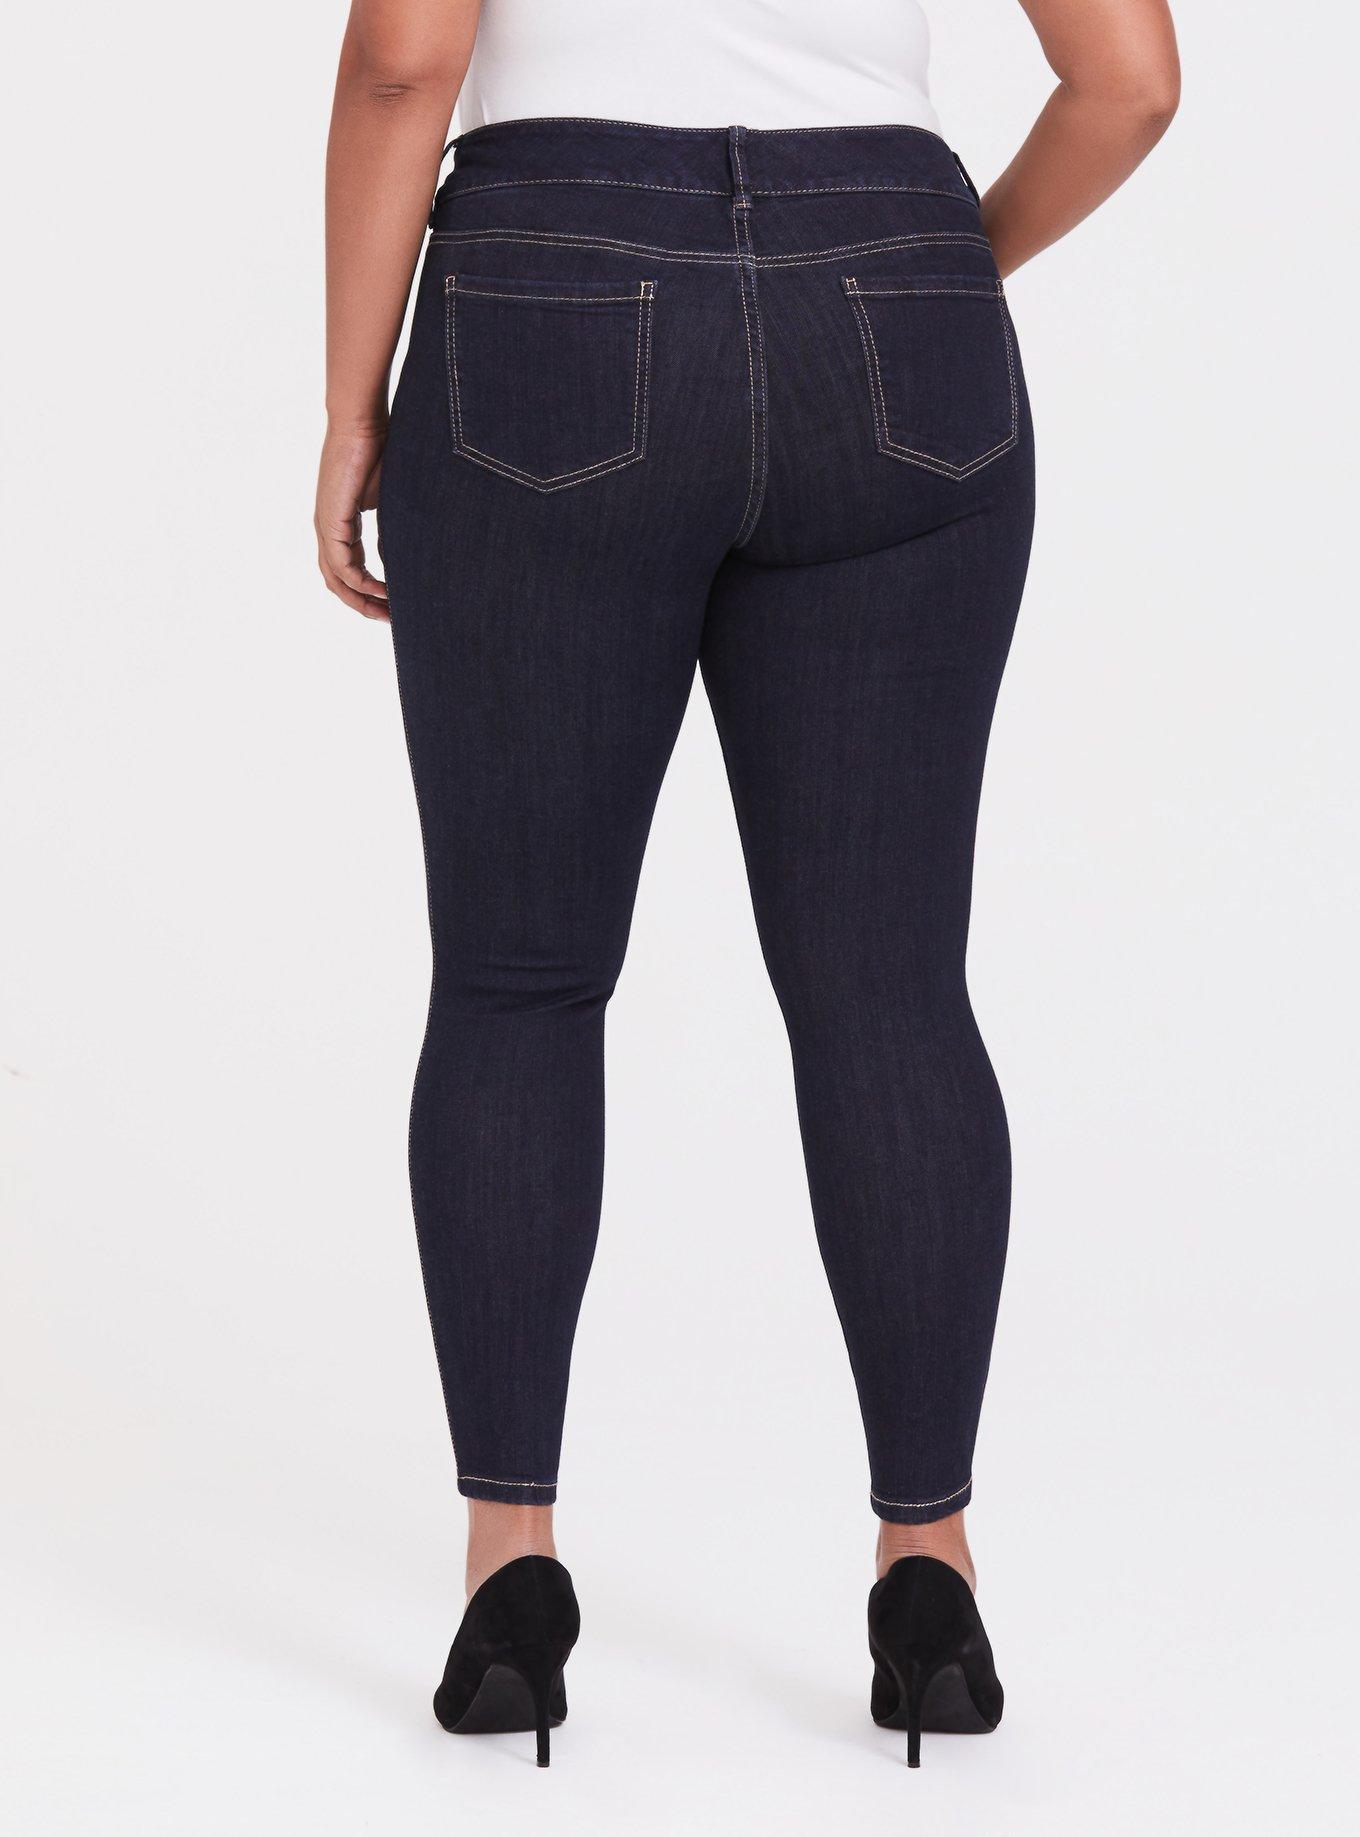 Jeggings − Now: 300+ Items up to −79%